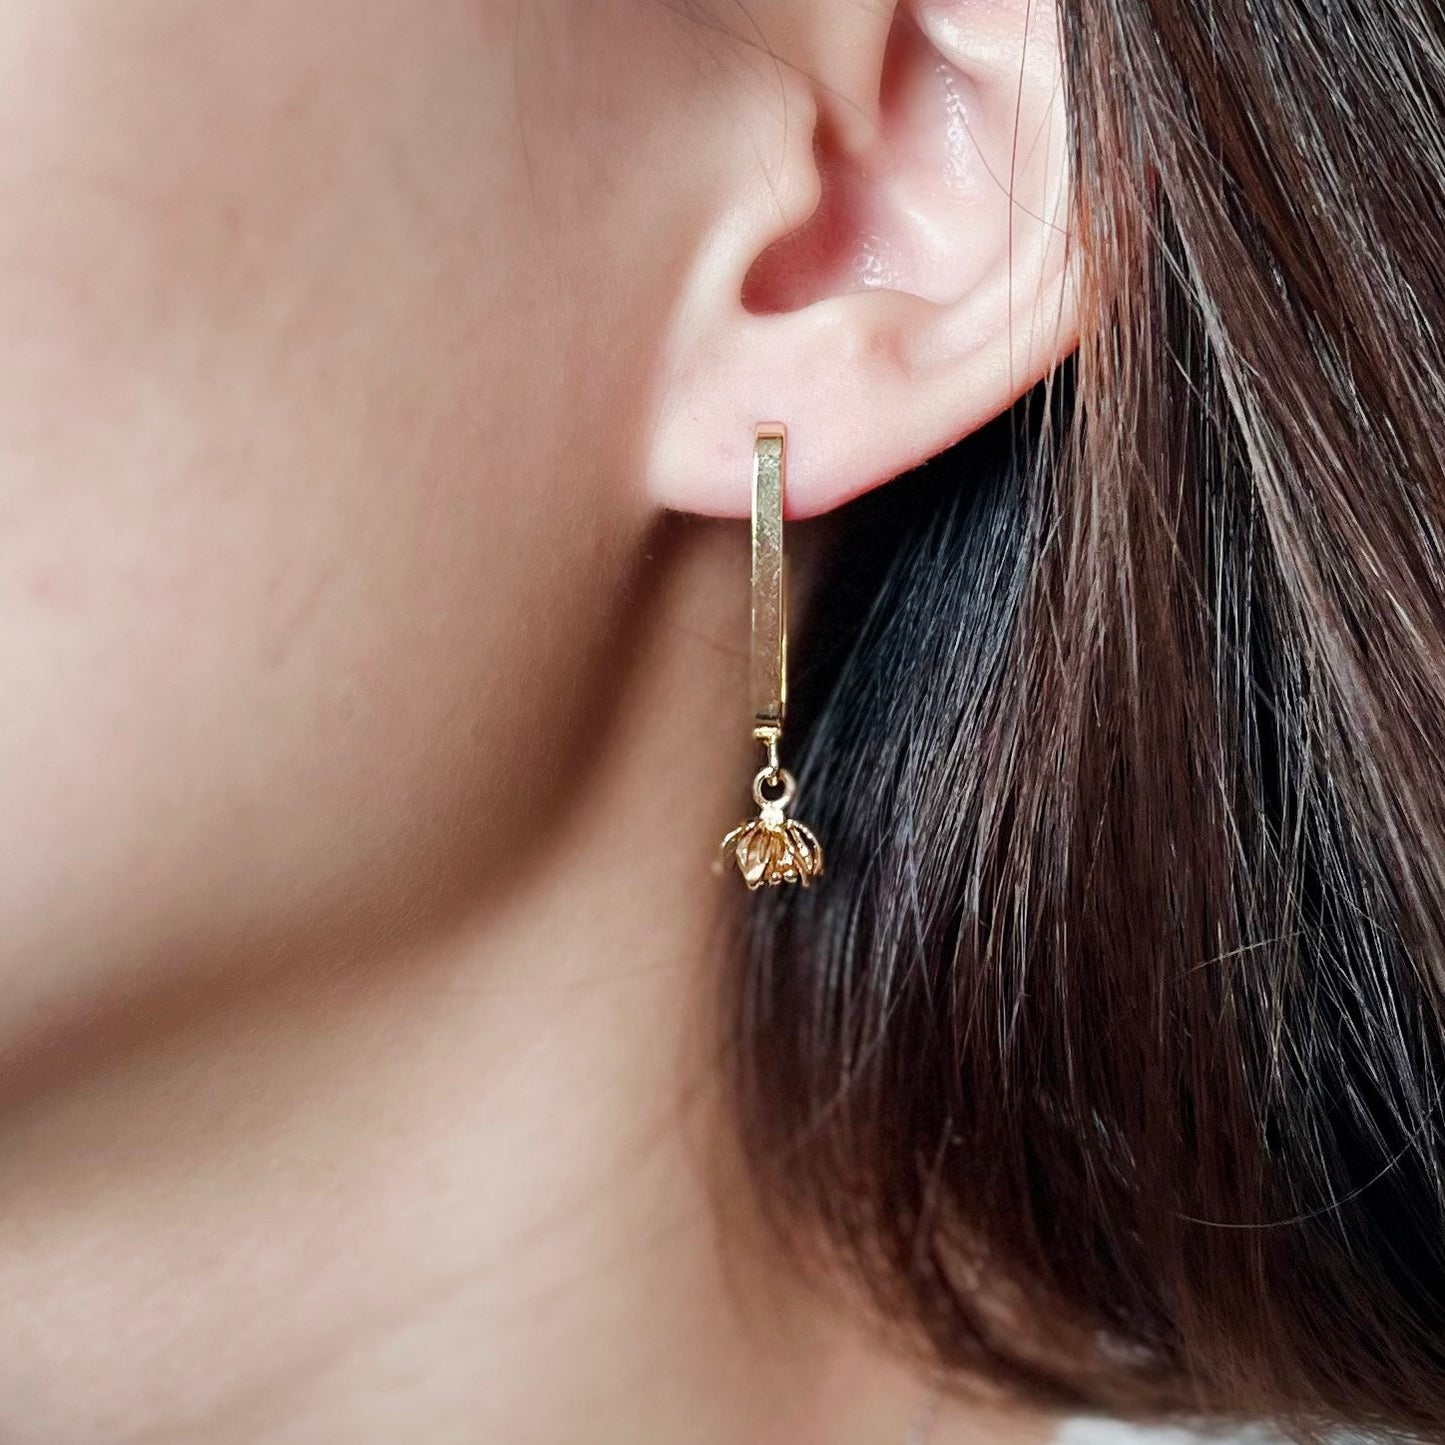 Snowdrop (16k gold-plated) Earrings